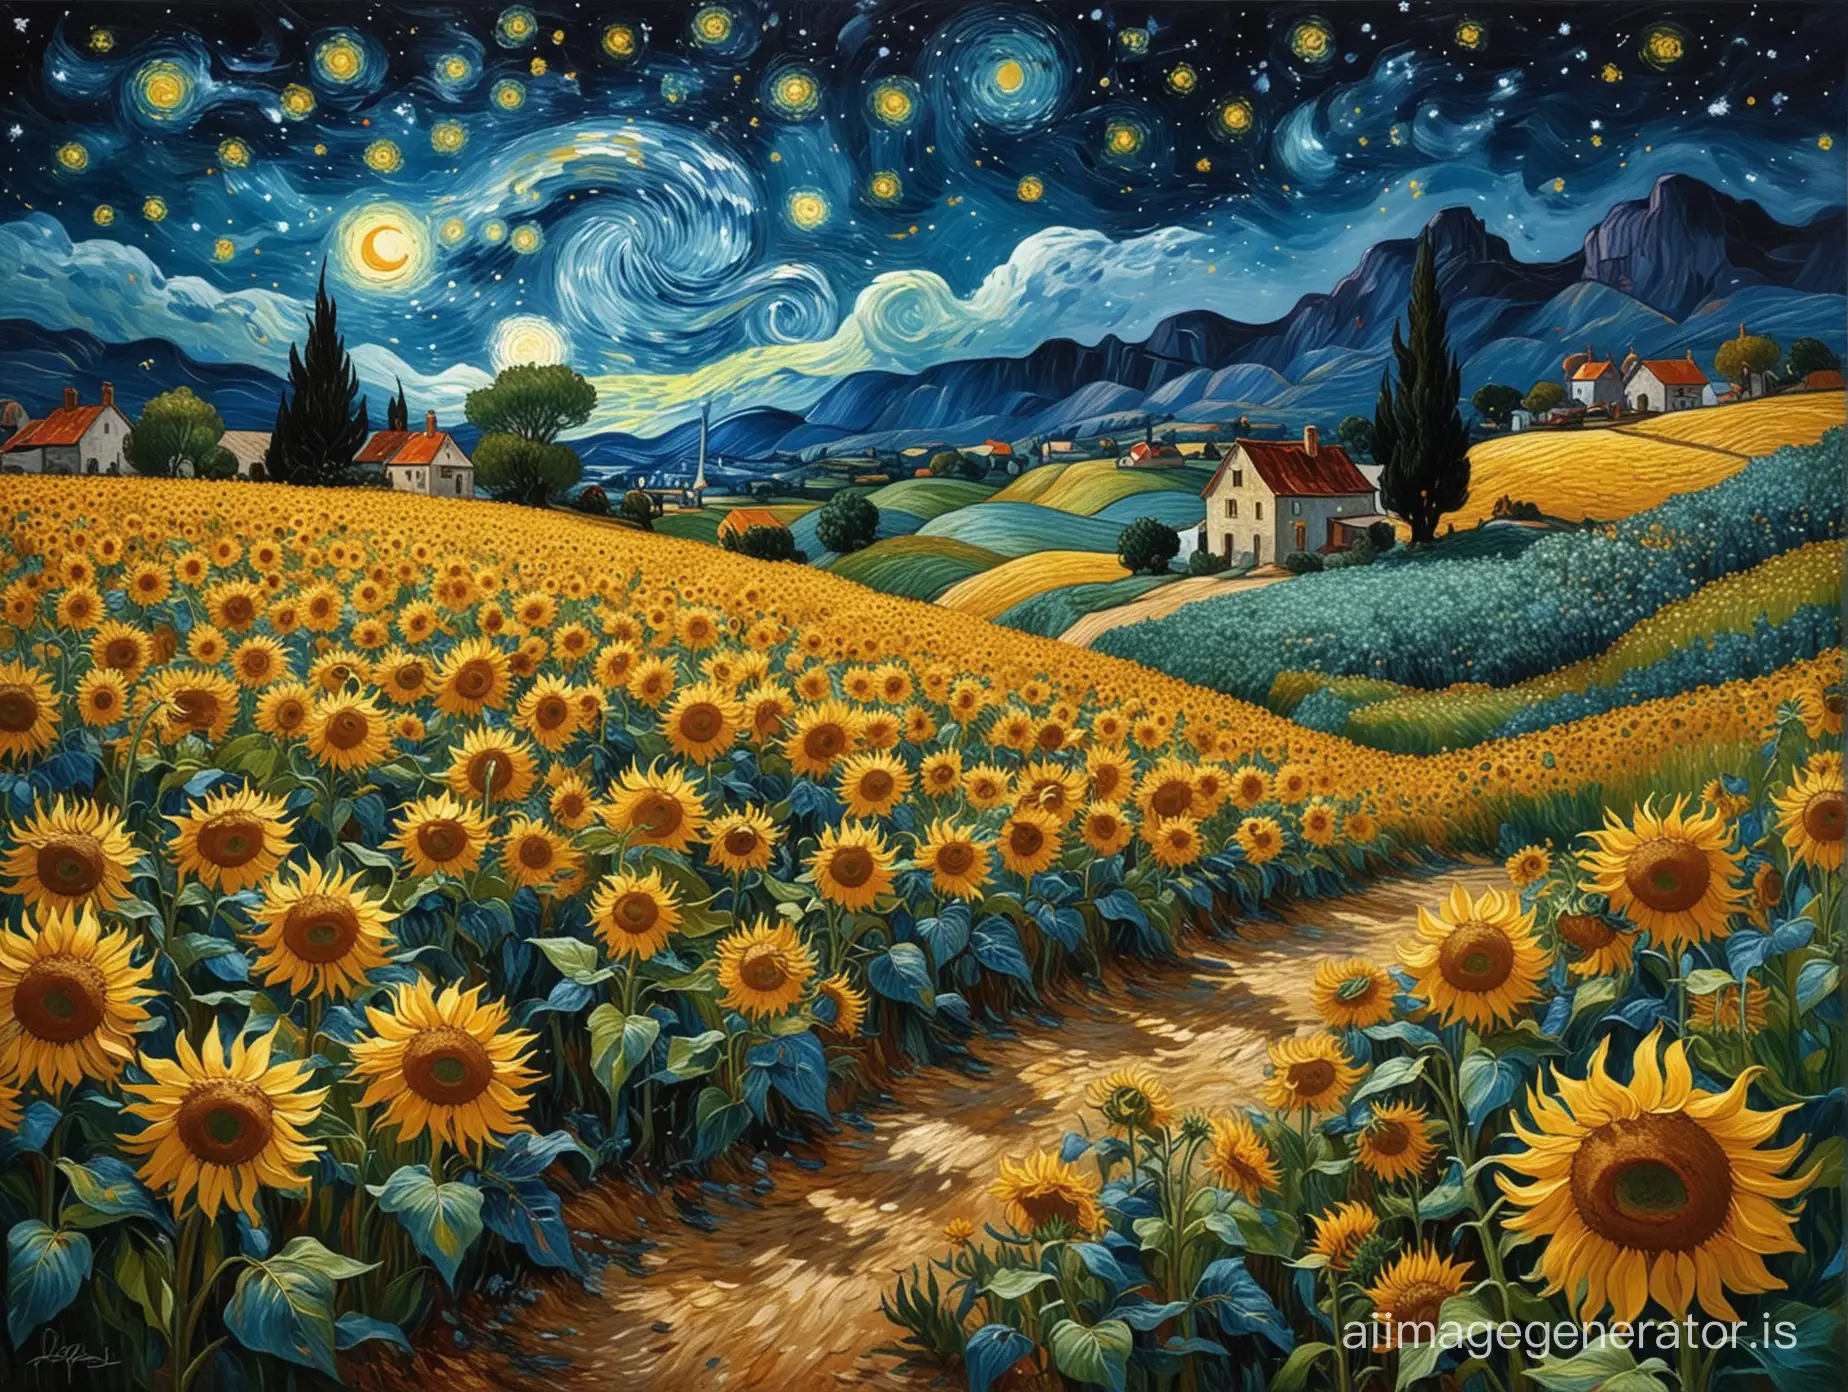 a high-quality symbiosis of van Gogh's "Starry Night" and "Sunflowers" paintings with bright colors and swirling strokes, with a starry night sky, a sunflower, a peaceful village and rolling hills. The scene should evoke a sense of calm and beauty, with a touch of impressionism and expressionism. Colours should be rich and bold, with quality similar to sleep. The general composition should be balanced and harmonious, reflecting the essence of the landscape, which is felt both habitually and otherworldly. The image should be detailed, with intricate textures and layers that add depth to the painting. This work should be suitable for gallery display, showcasing the beauty of nature in a unique and fascinating way.